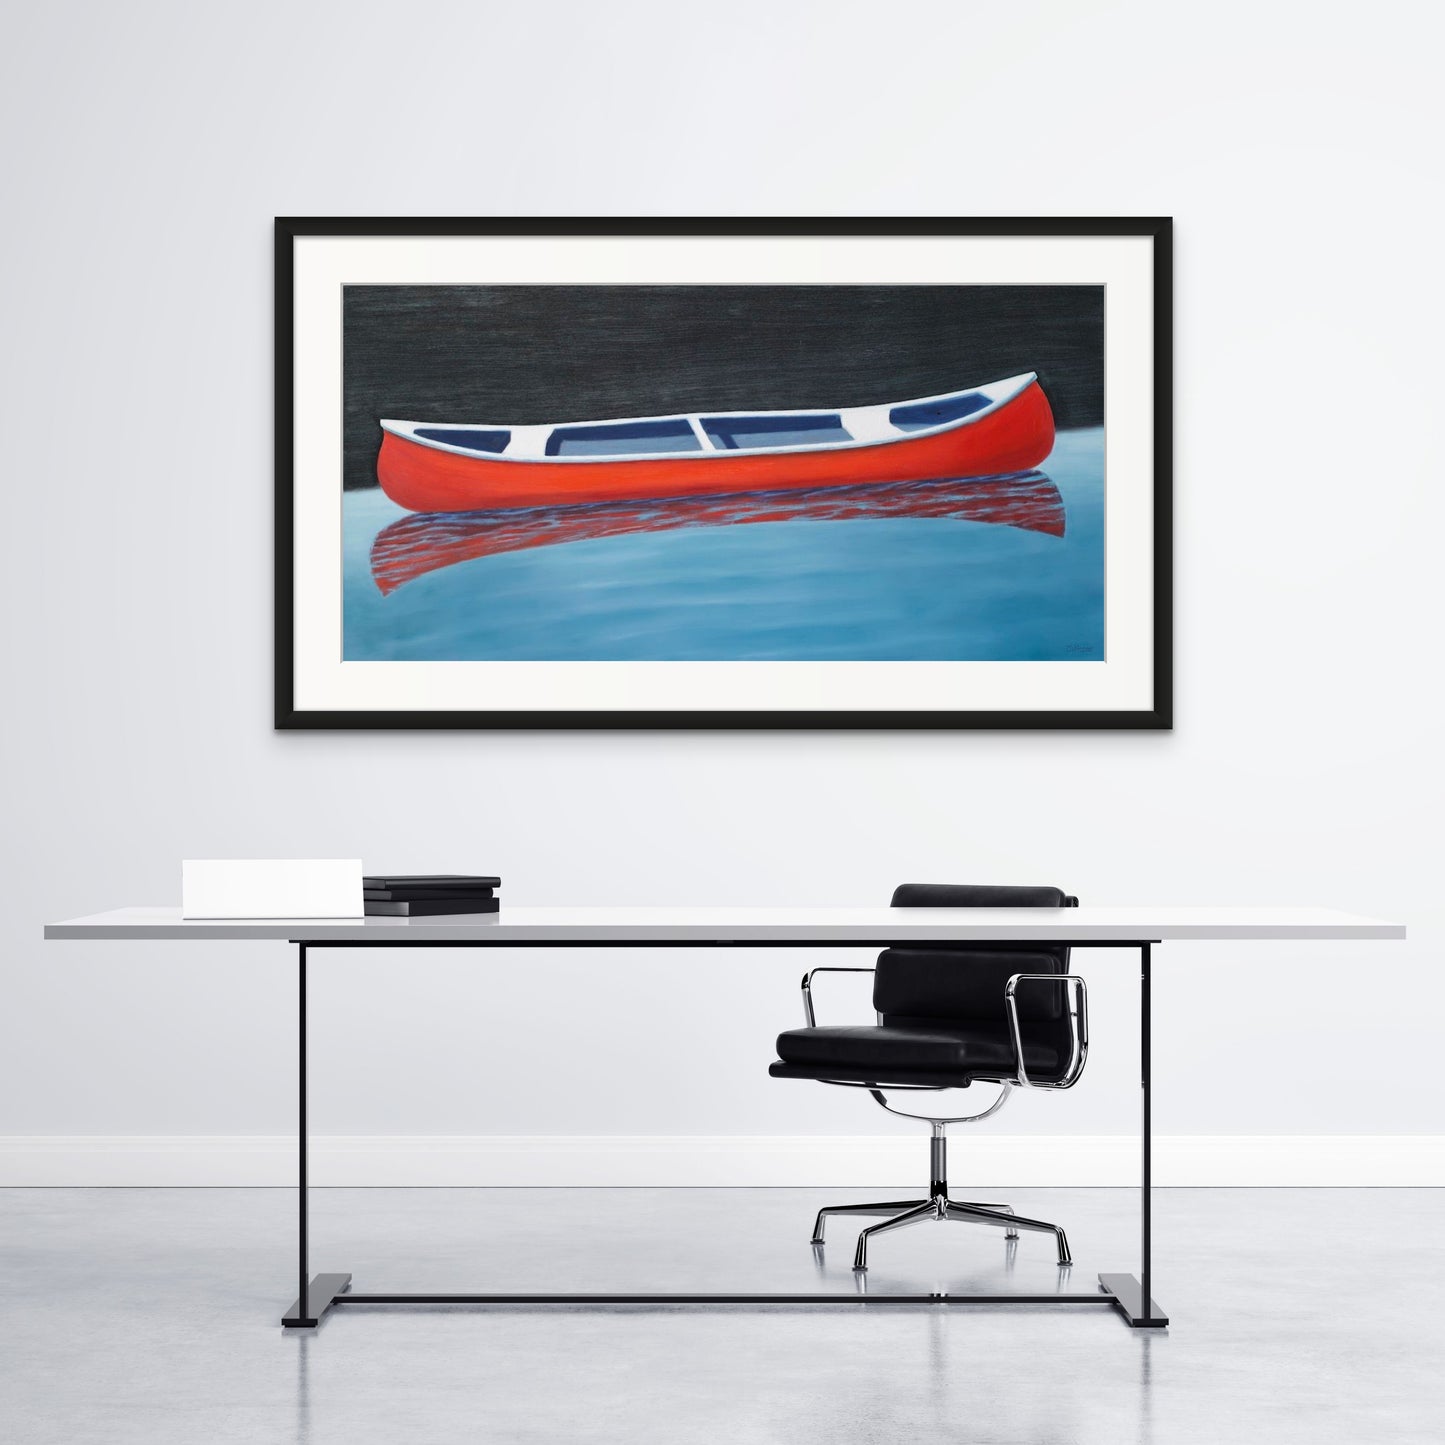 Canoe painting of a small red boat by Canadian artist Catherine McKinnon. The red canoe is floating on almost still blue water in the foreground and the background is pitch black. The giclee print is framed in black with white matting. It is mounted on a light gray wall above a contemporary desk and black chair.